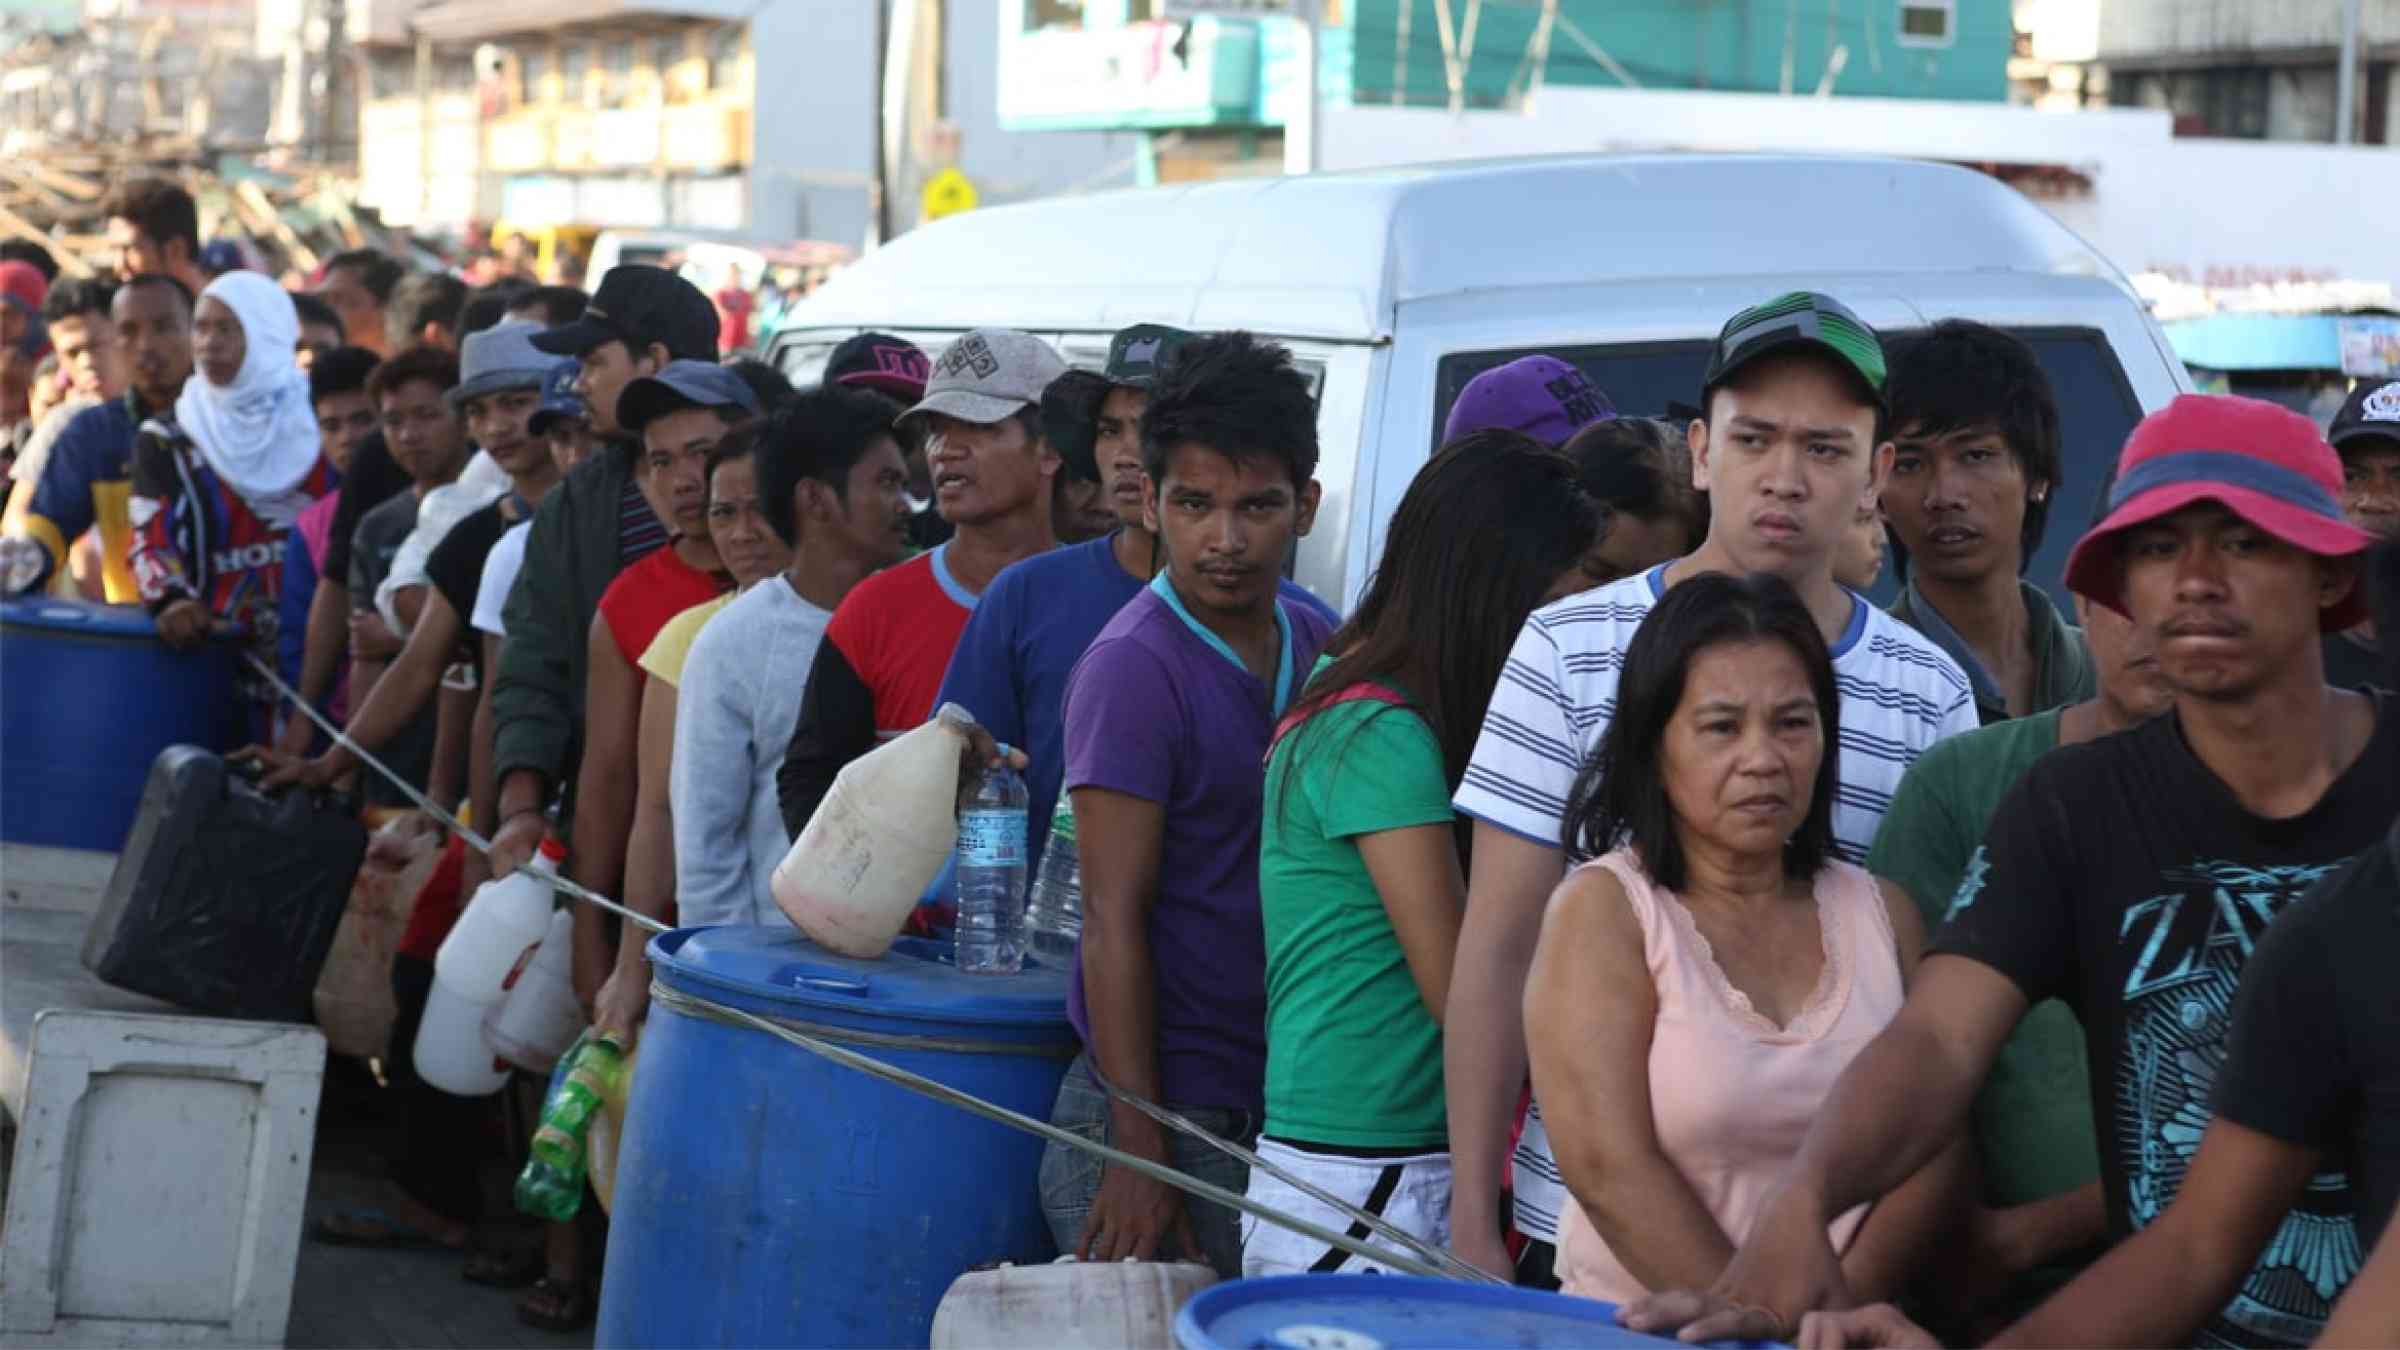 People waiting in line after Typhoon Haiyan in Tacloban, Philippines (2013)